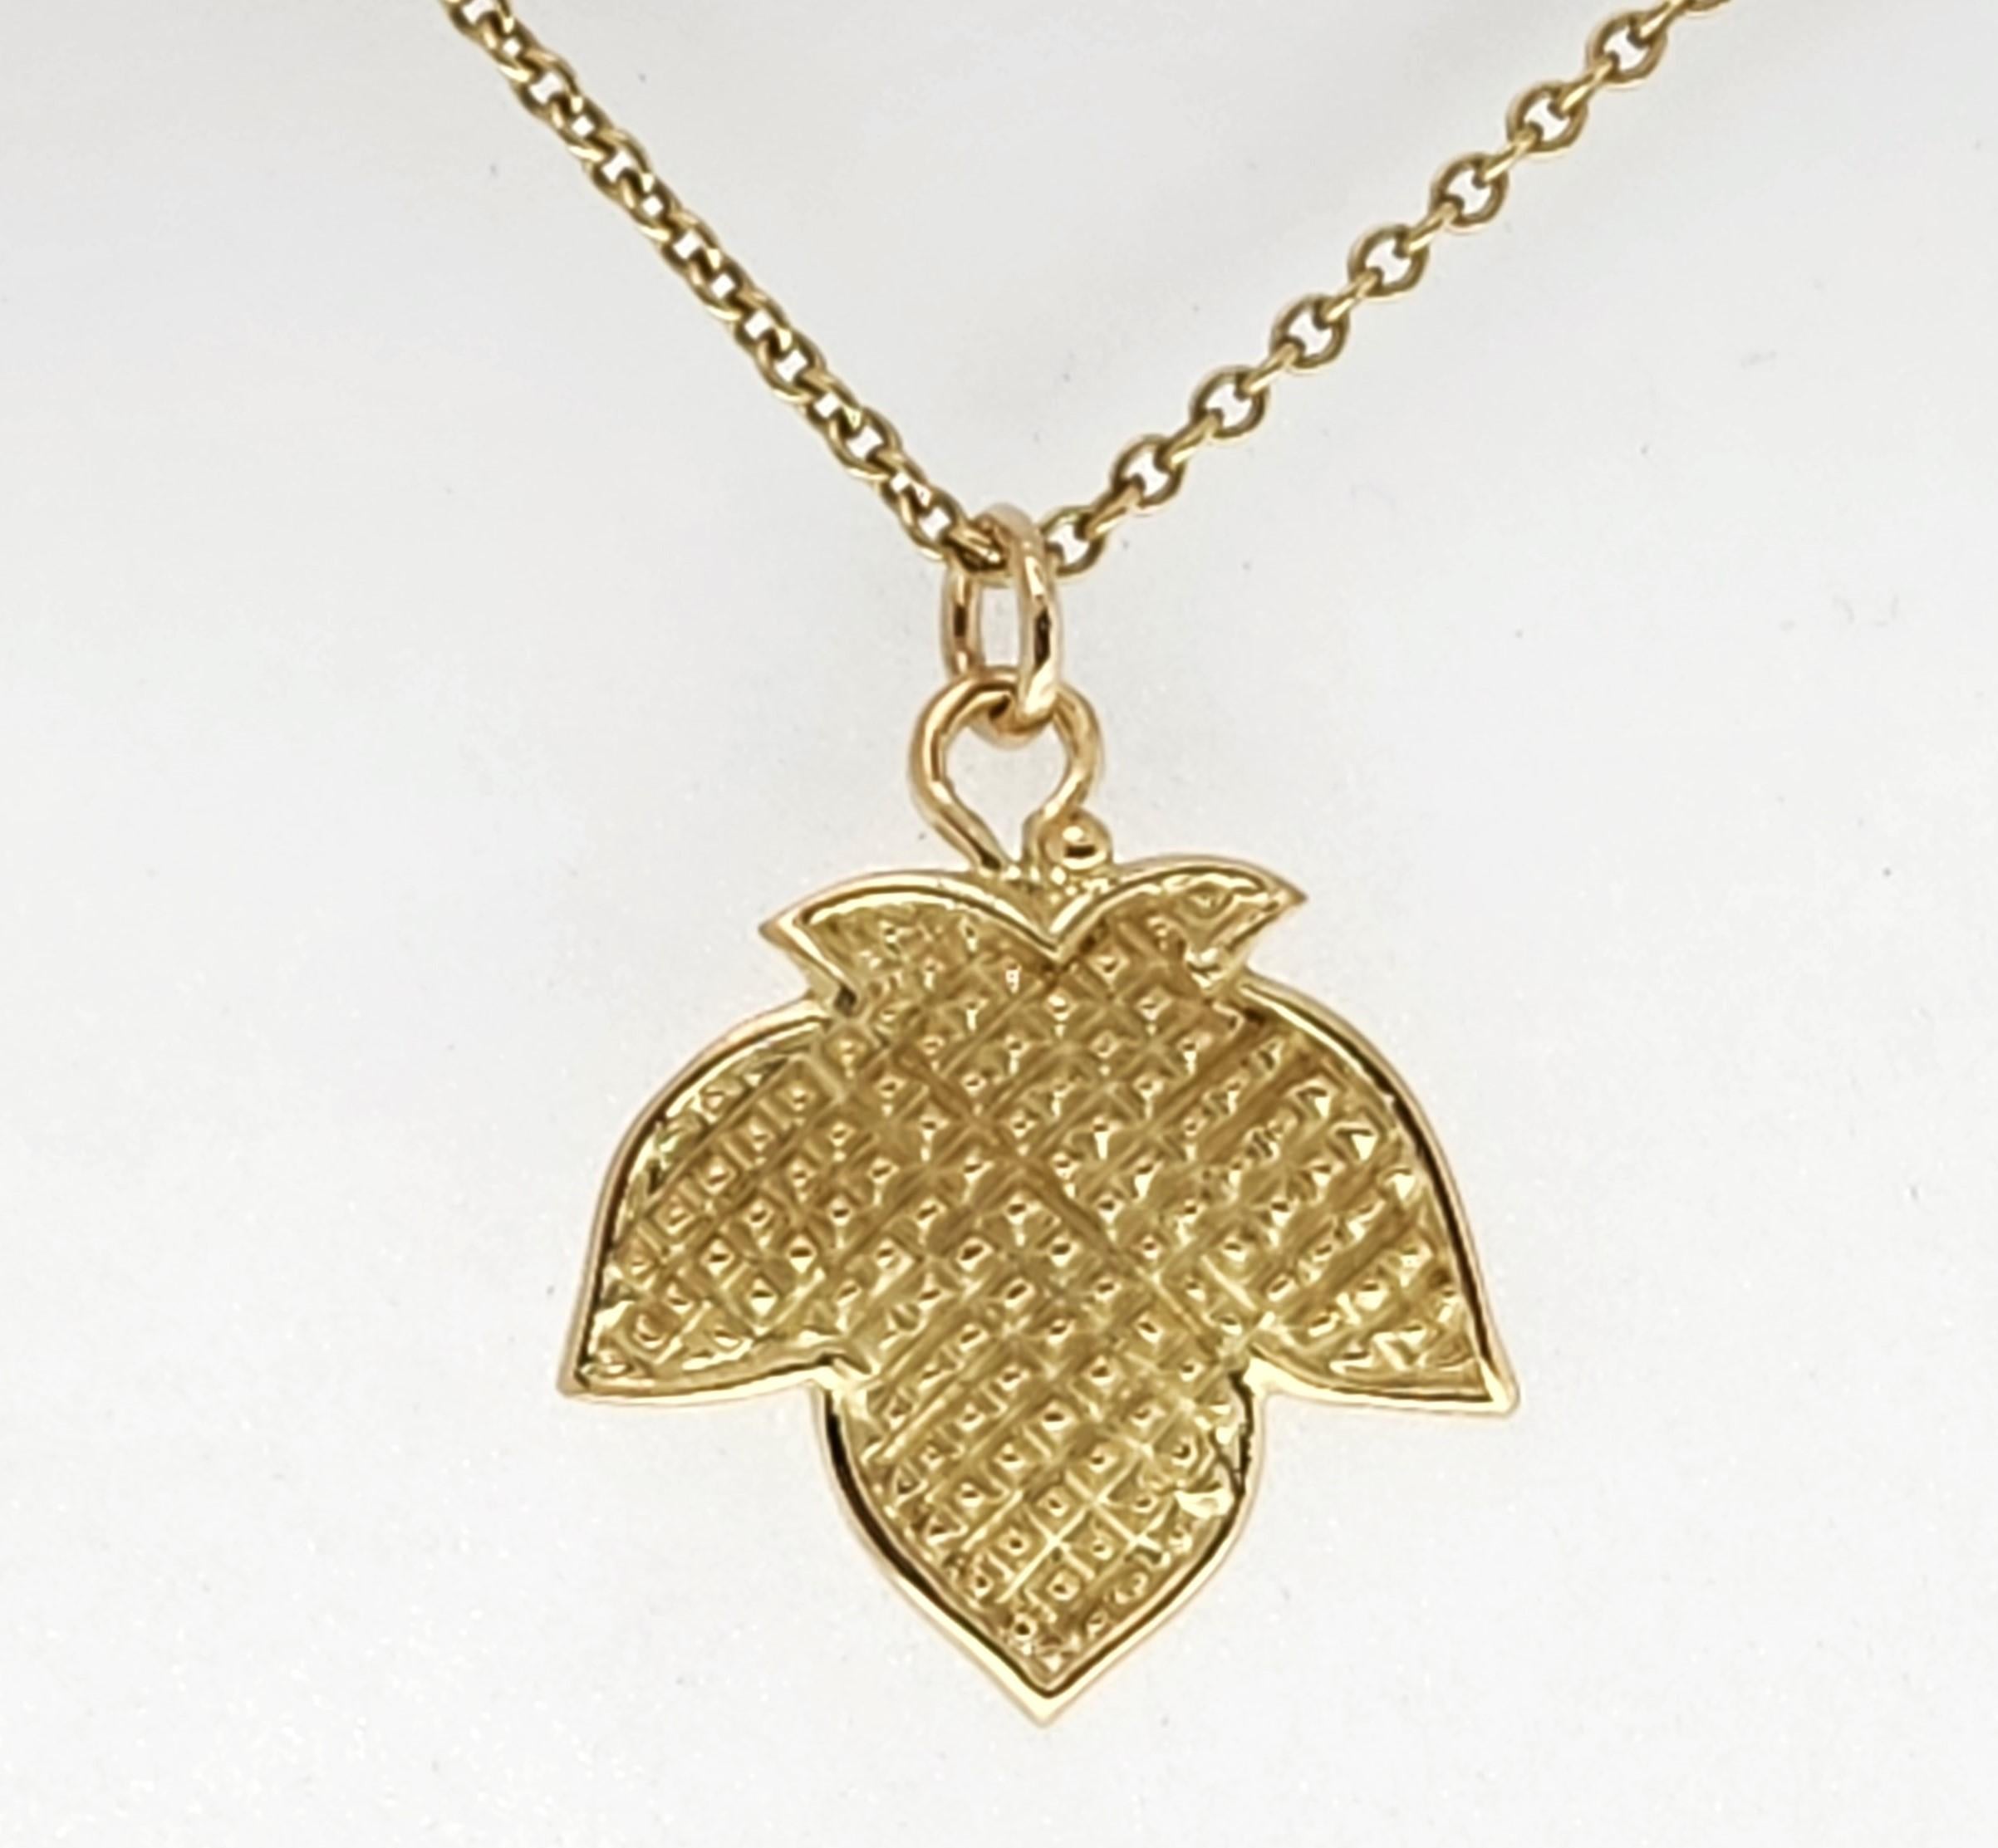 Alison Nagasue Beaded Maple Leaf in 18K Green Gold Pendant In New Condition For Sale In Rutherford, NJ